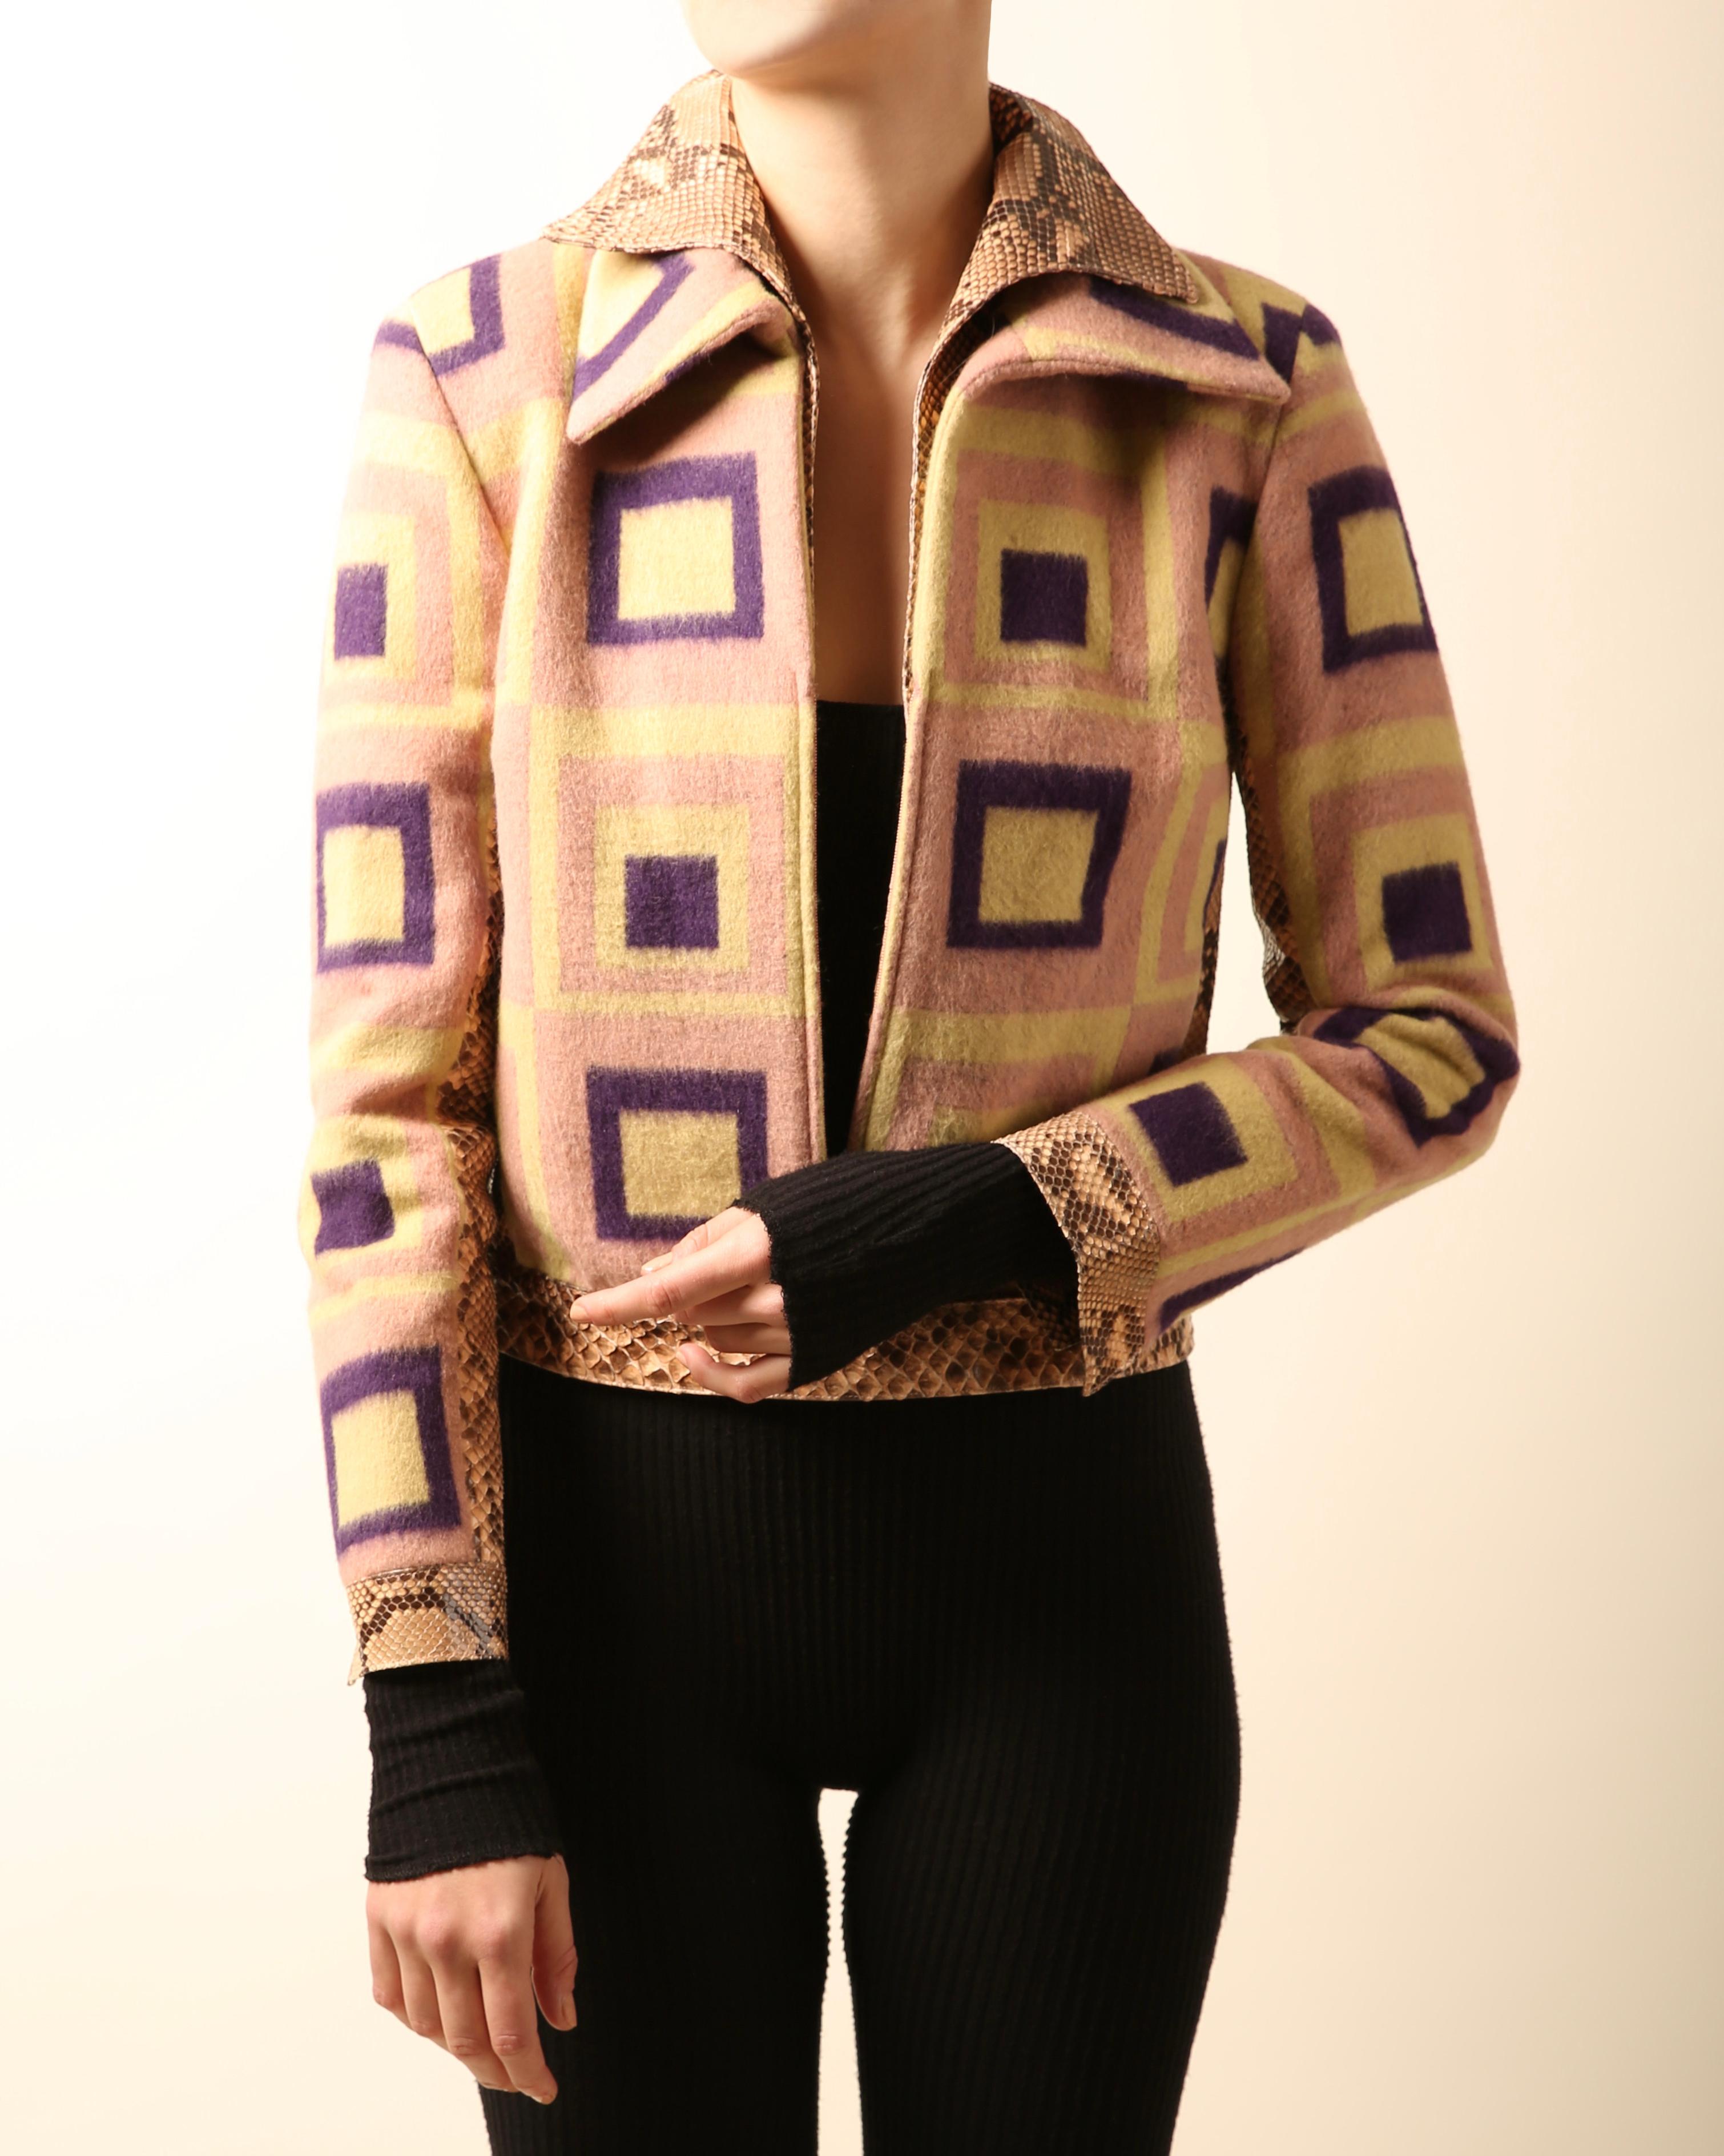 A very rare jacket from Gianni Versace Couture F/W 2000, featured in their fall campaign starring Amber Valletta
Pink with purple and yellow geometric print
Pink and brown python collar, cuffs, hem and trim to the sleeves
Double collar
Closes via a